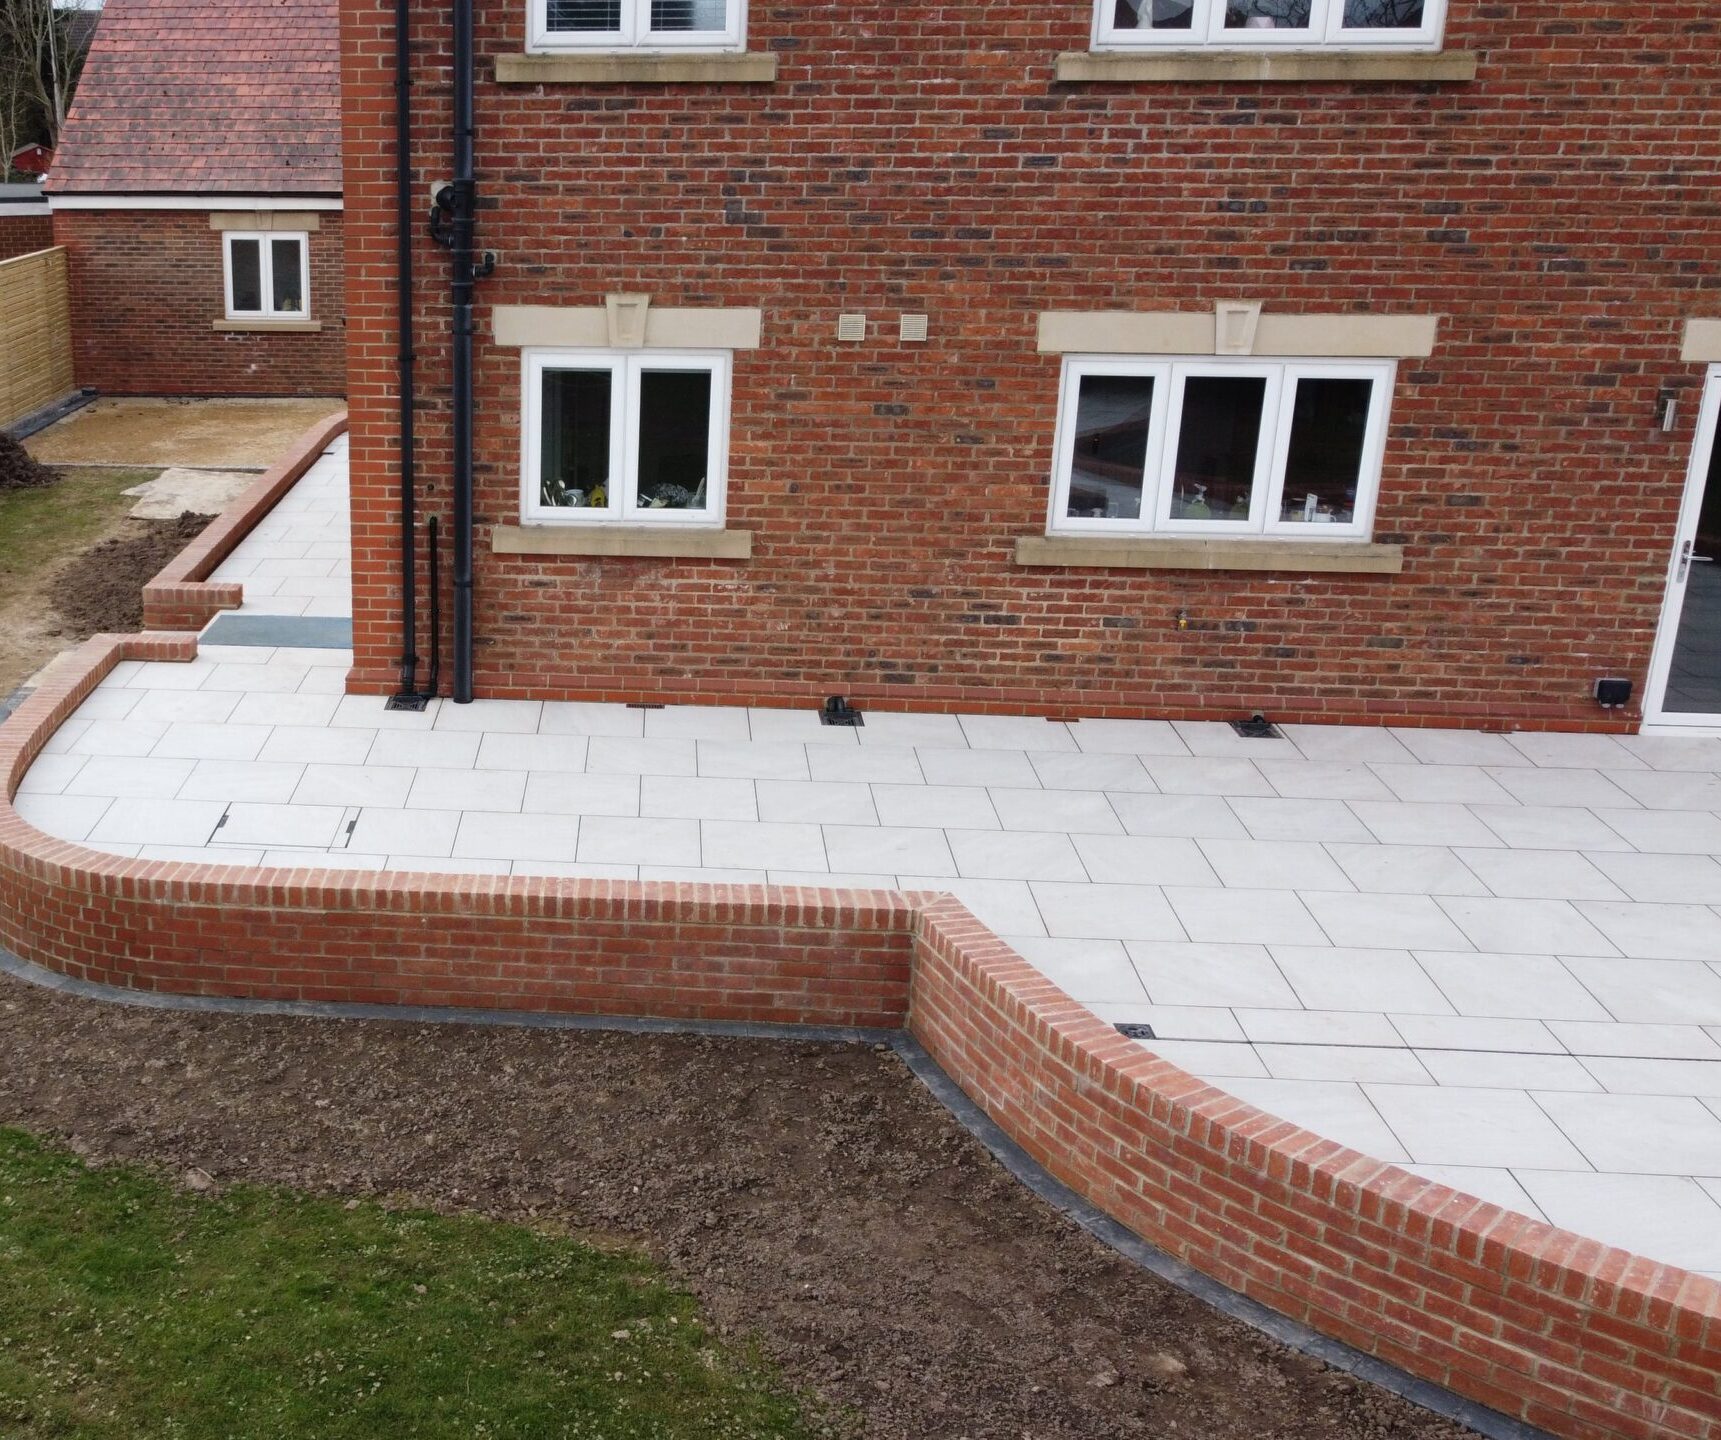 White patio wrapping around a red brick house